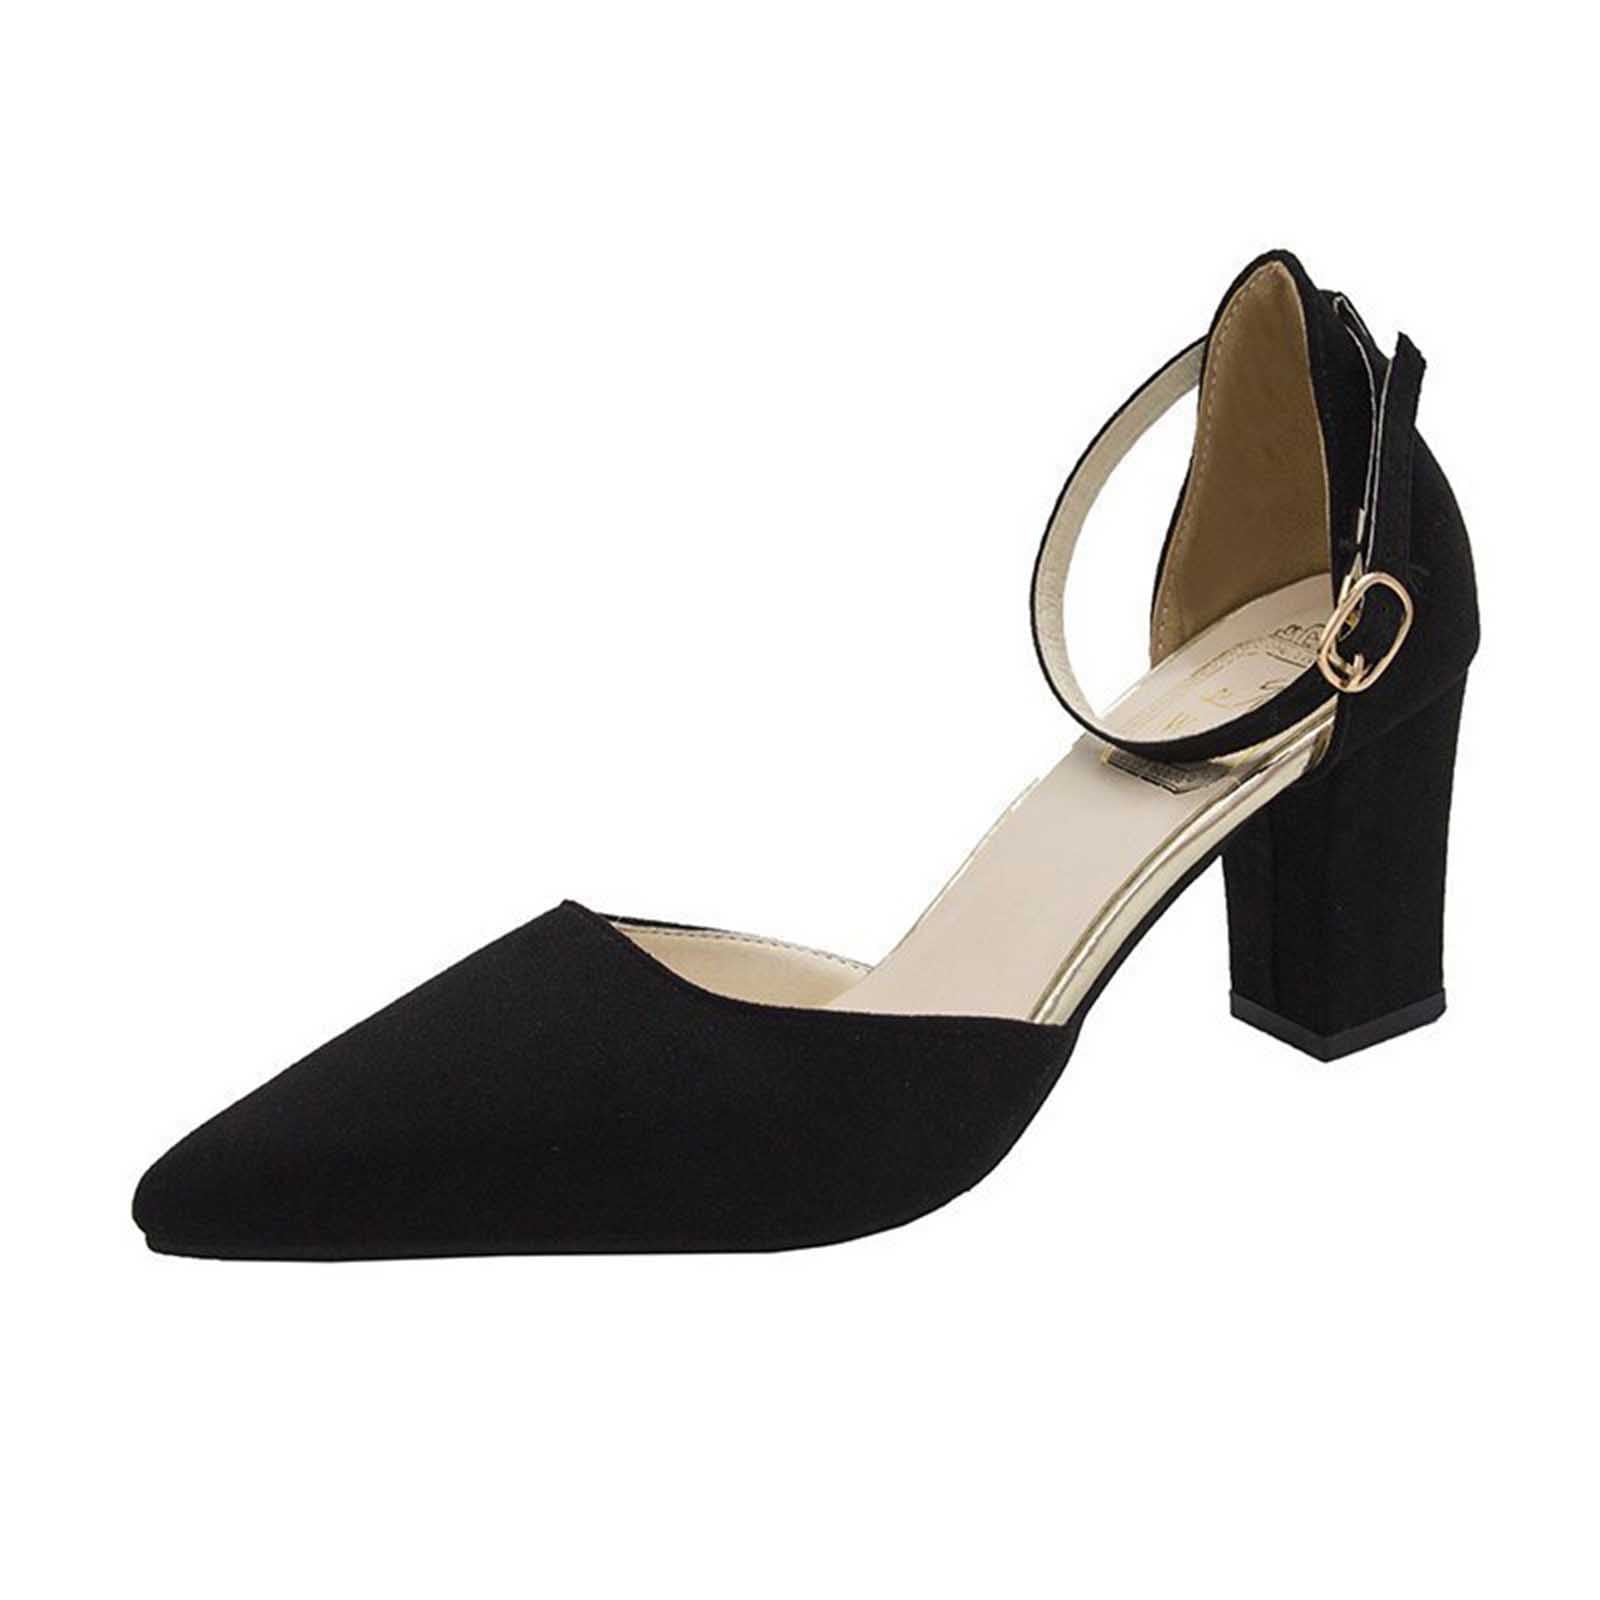 Hauiodp Closed Toe Heels for Women, Pointed Toe High Heels Pump Shoes ...